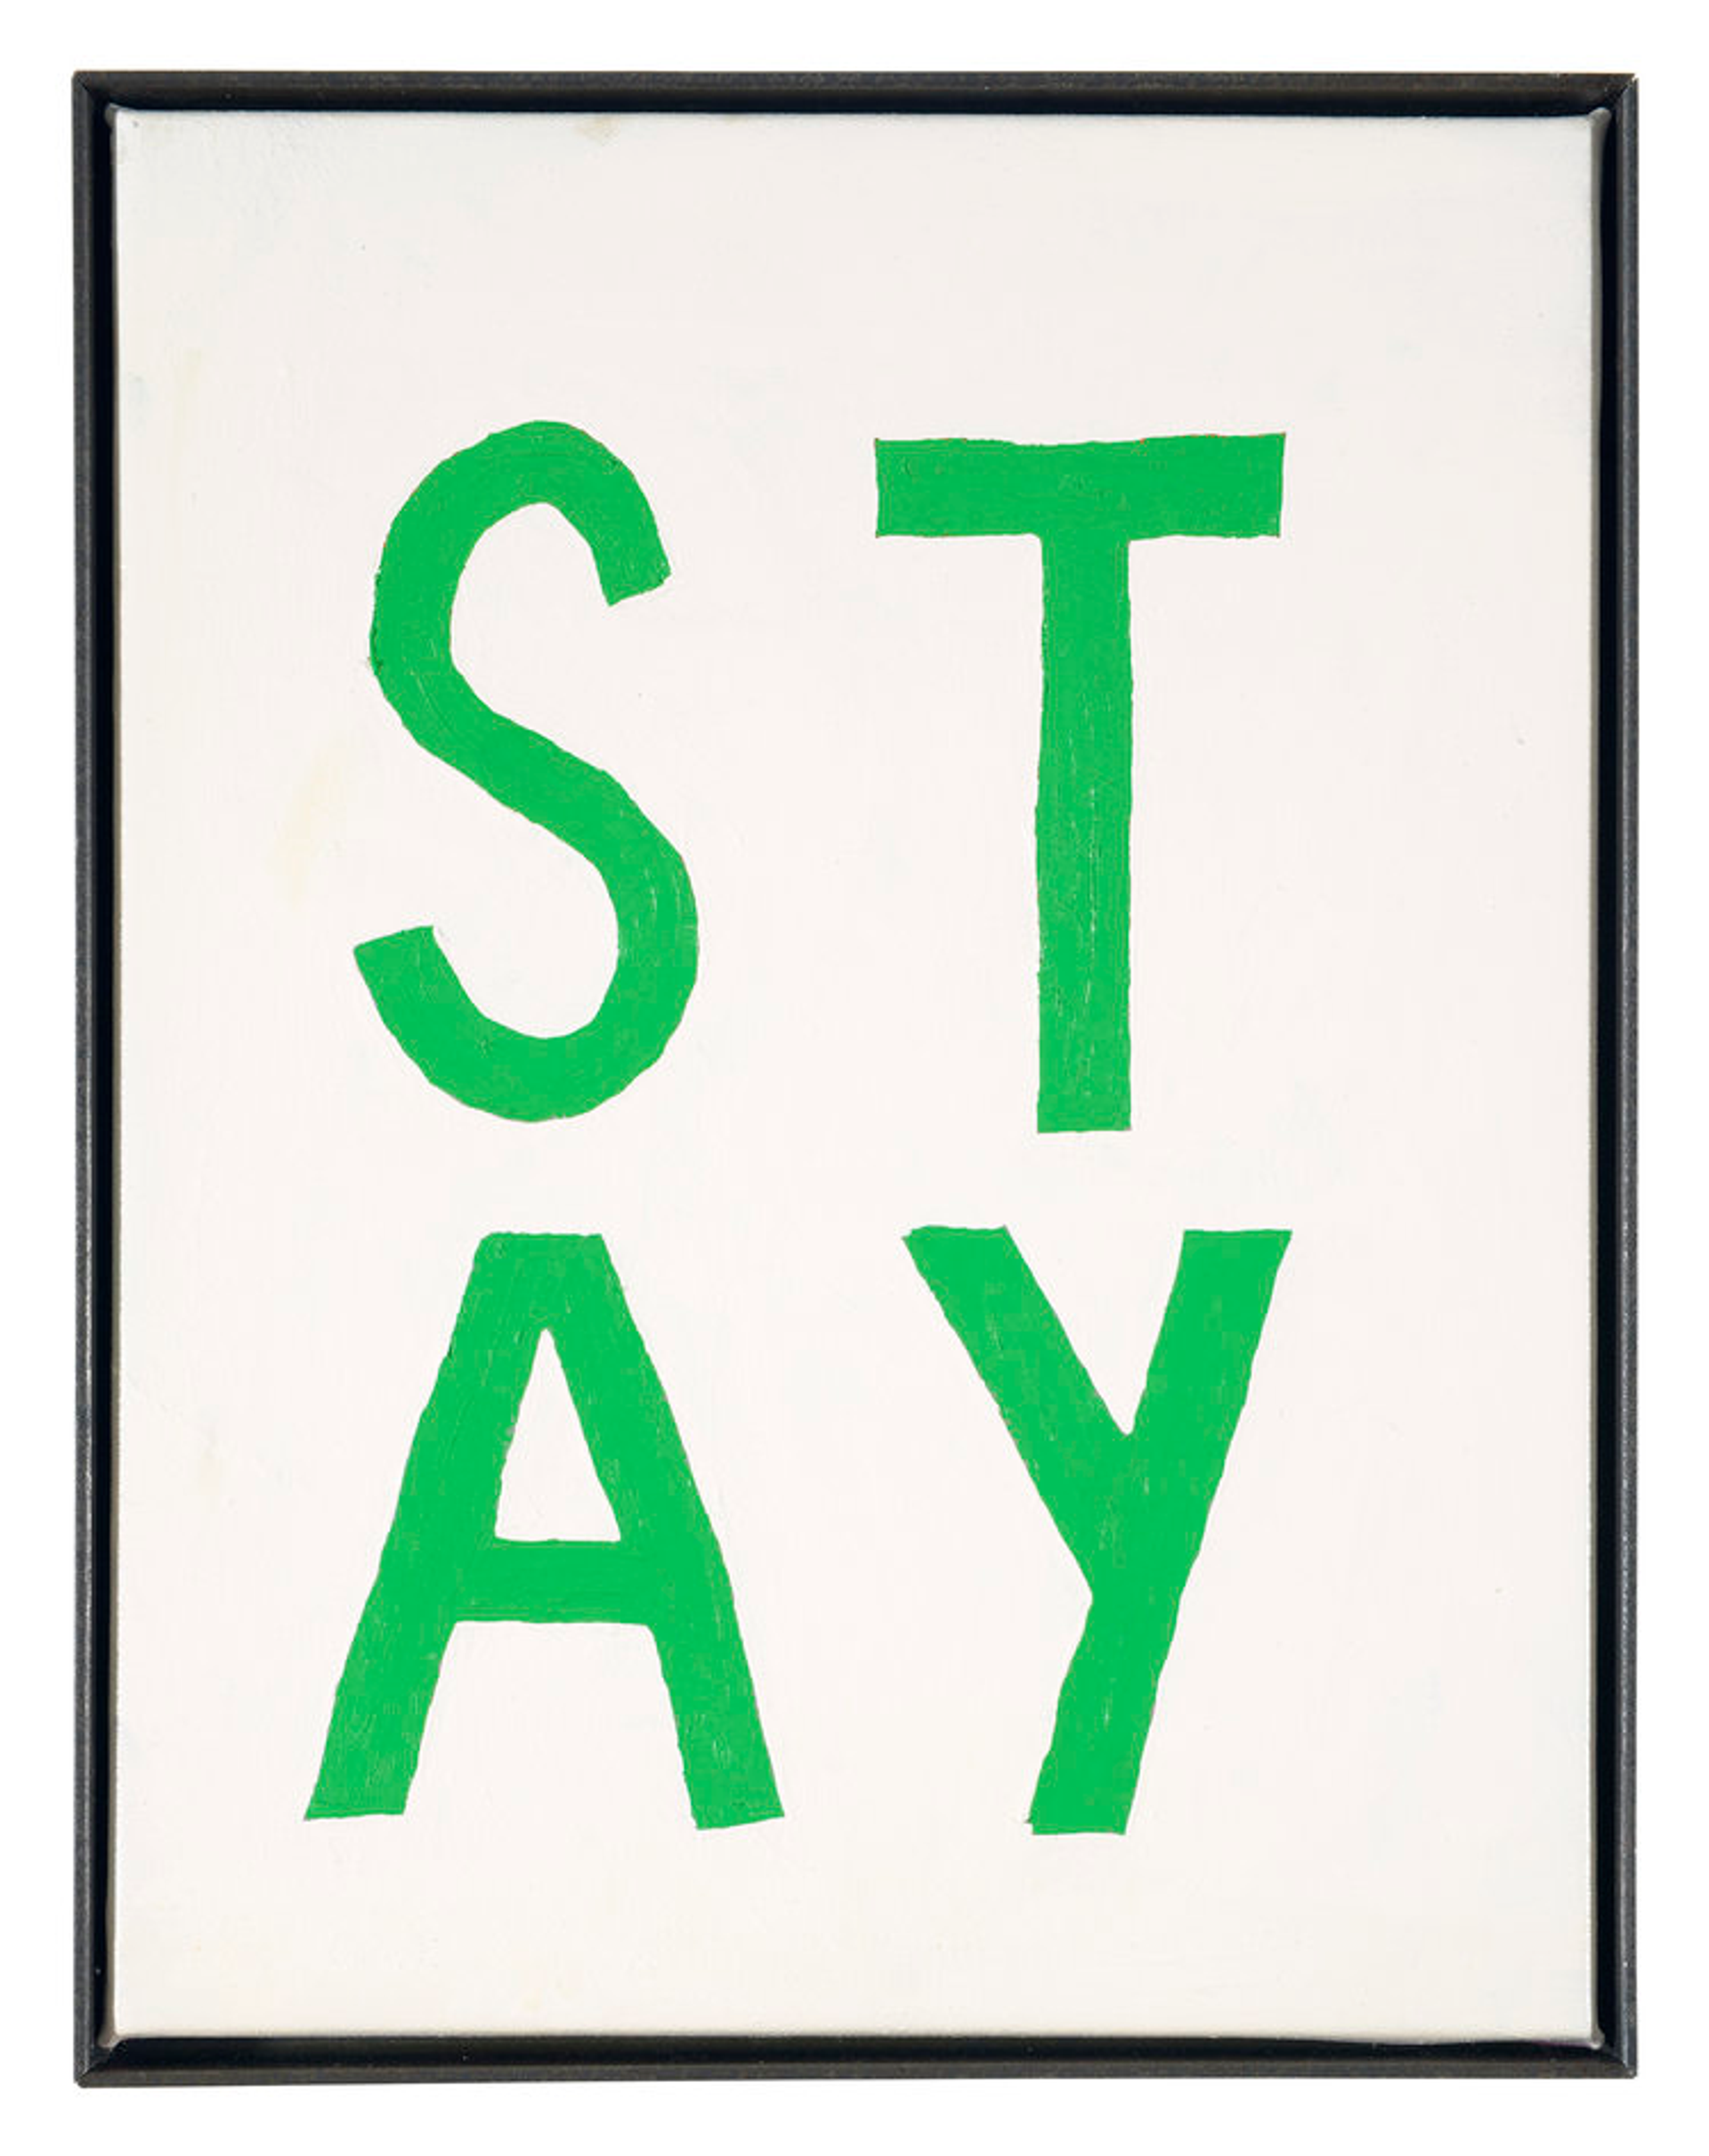 ART N MORE (Paul Bowler & Georg Weißbach), STAY (Four-letter words), 2016, Oil on canvas in artist's frame, 45 x 35 cm